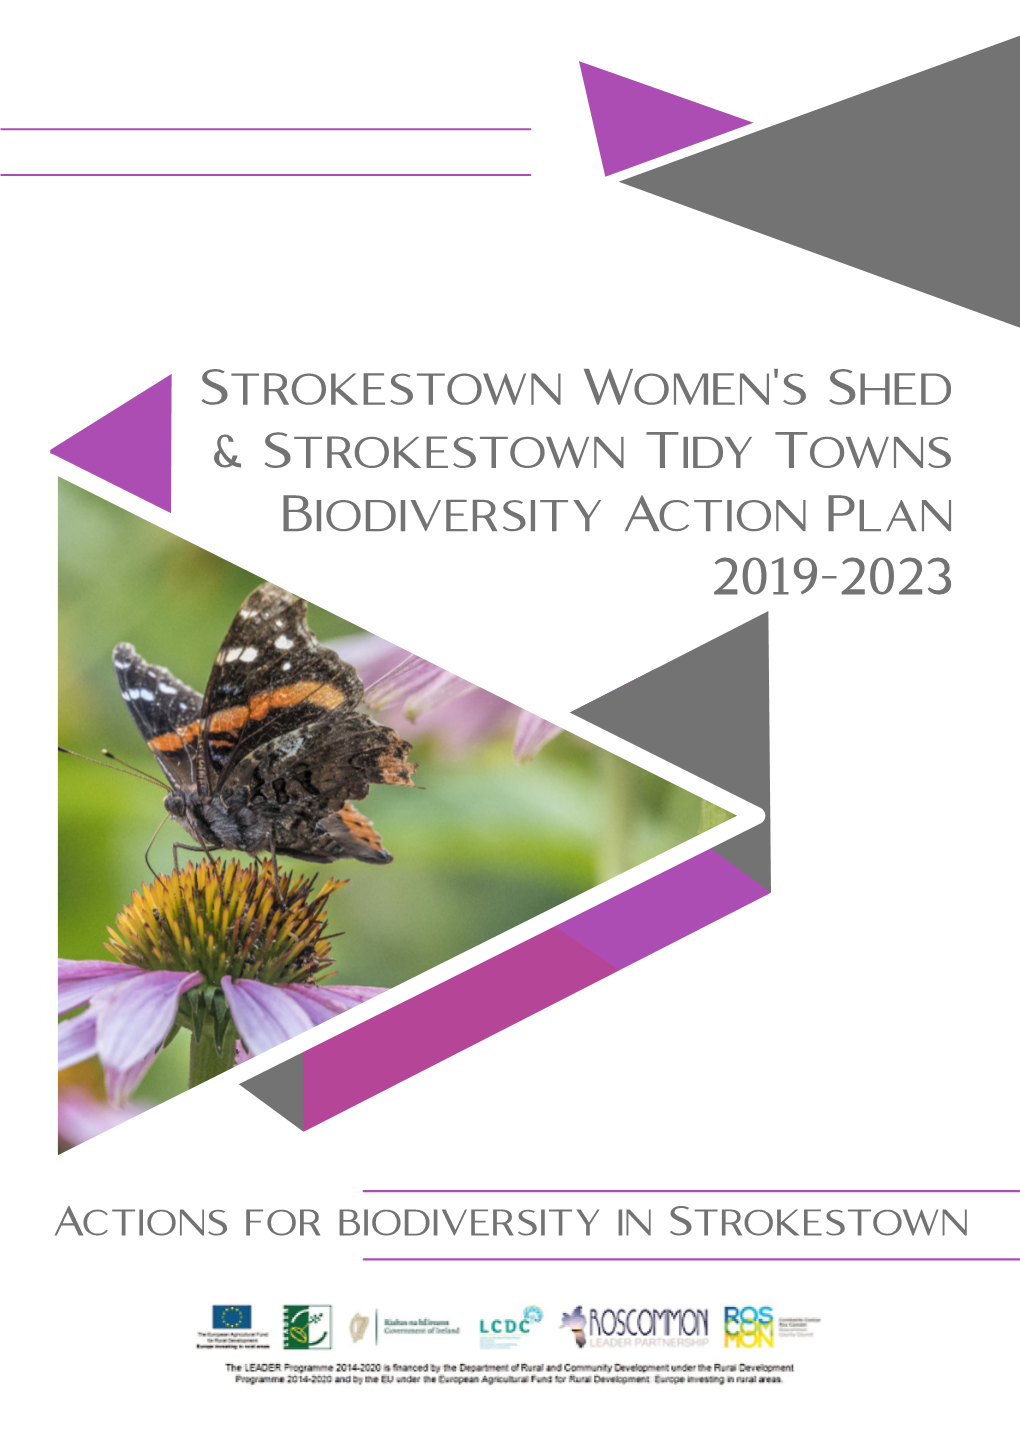 Actions for Biodiversity in Strokestown Strokestown Community Biodiversity Action Plan 2019-2023